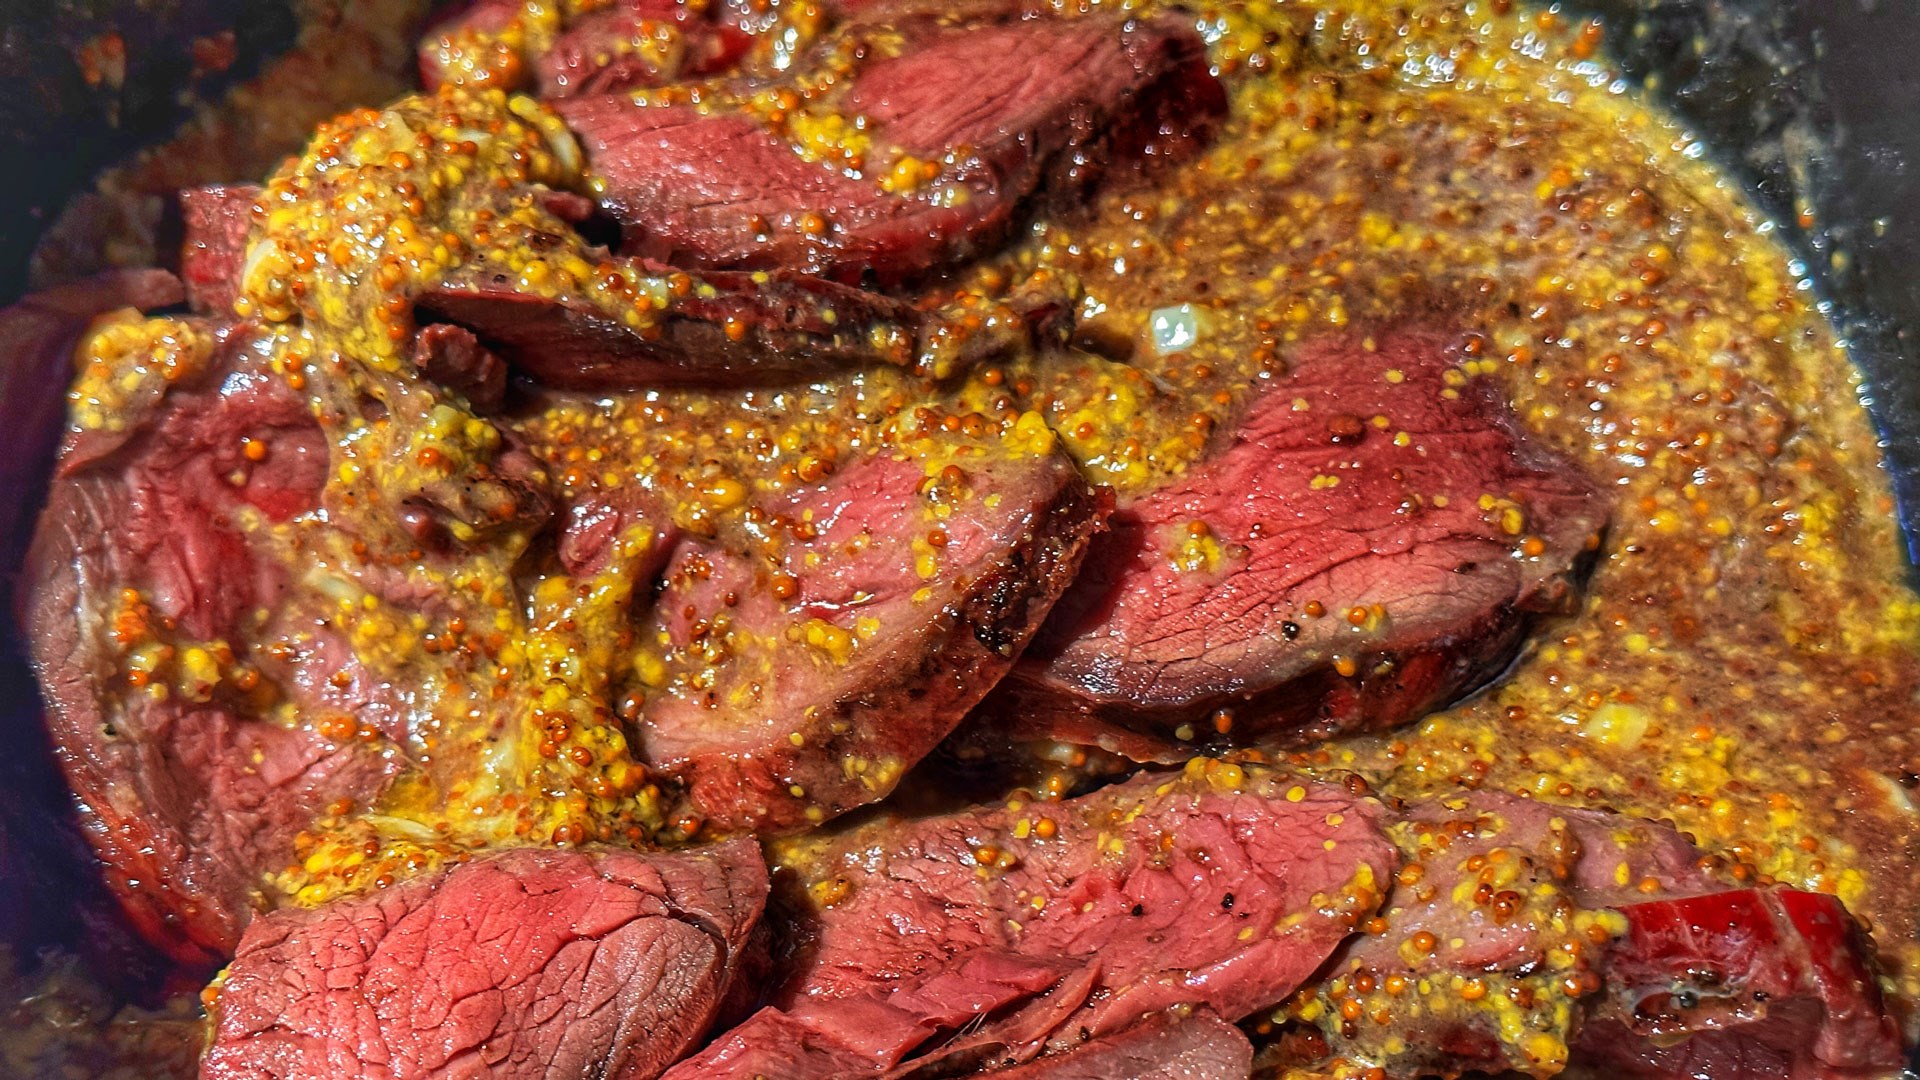 Rare pink venison doused in mustard sauce